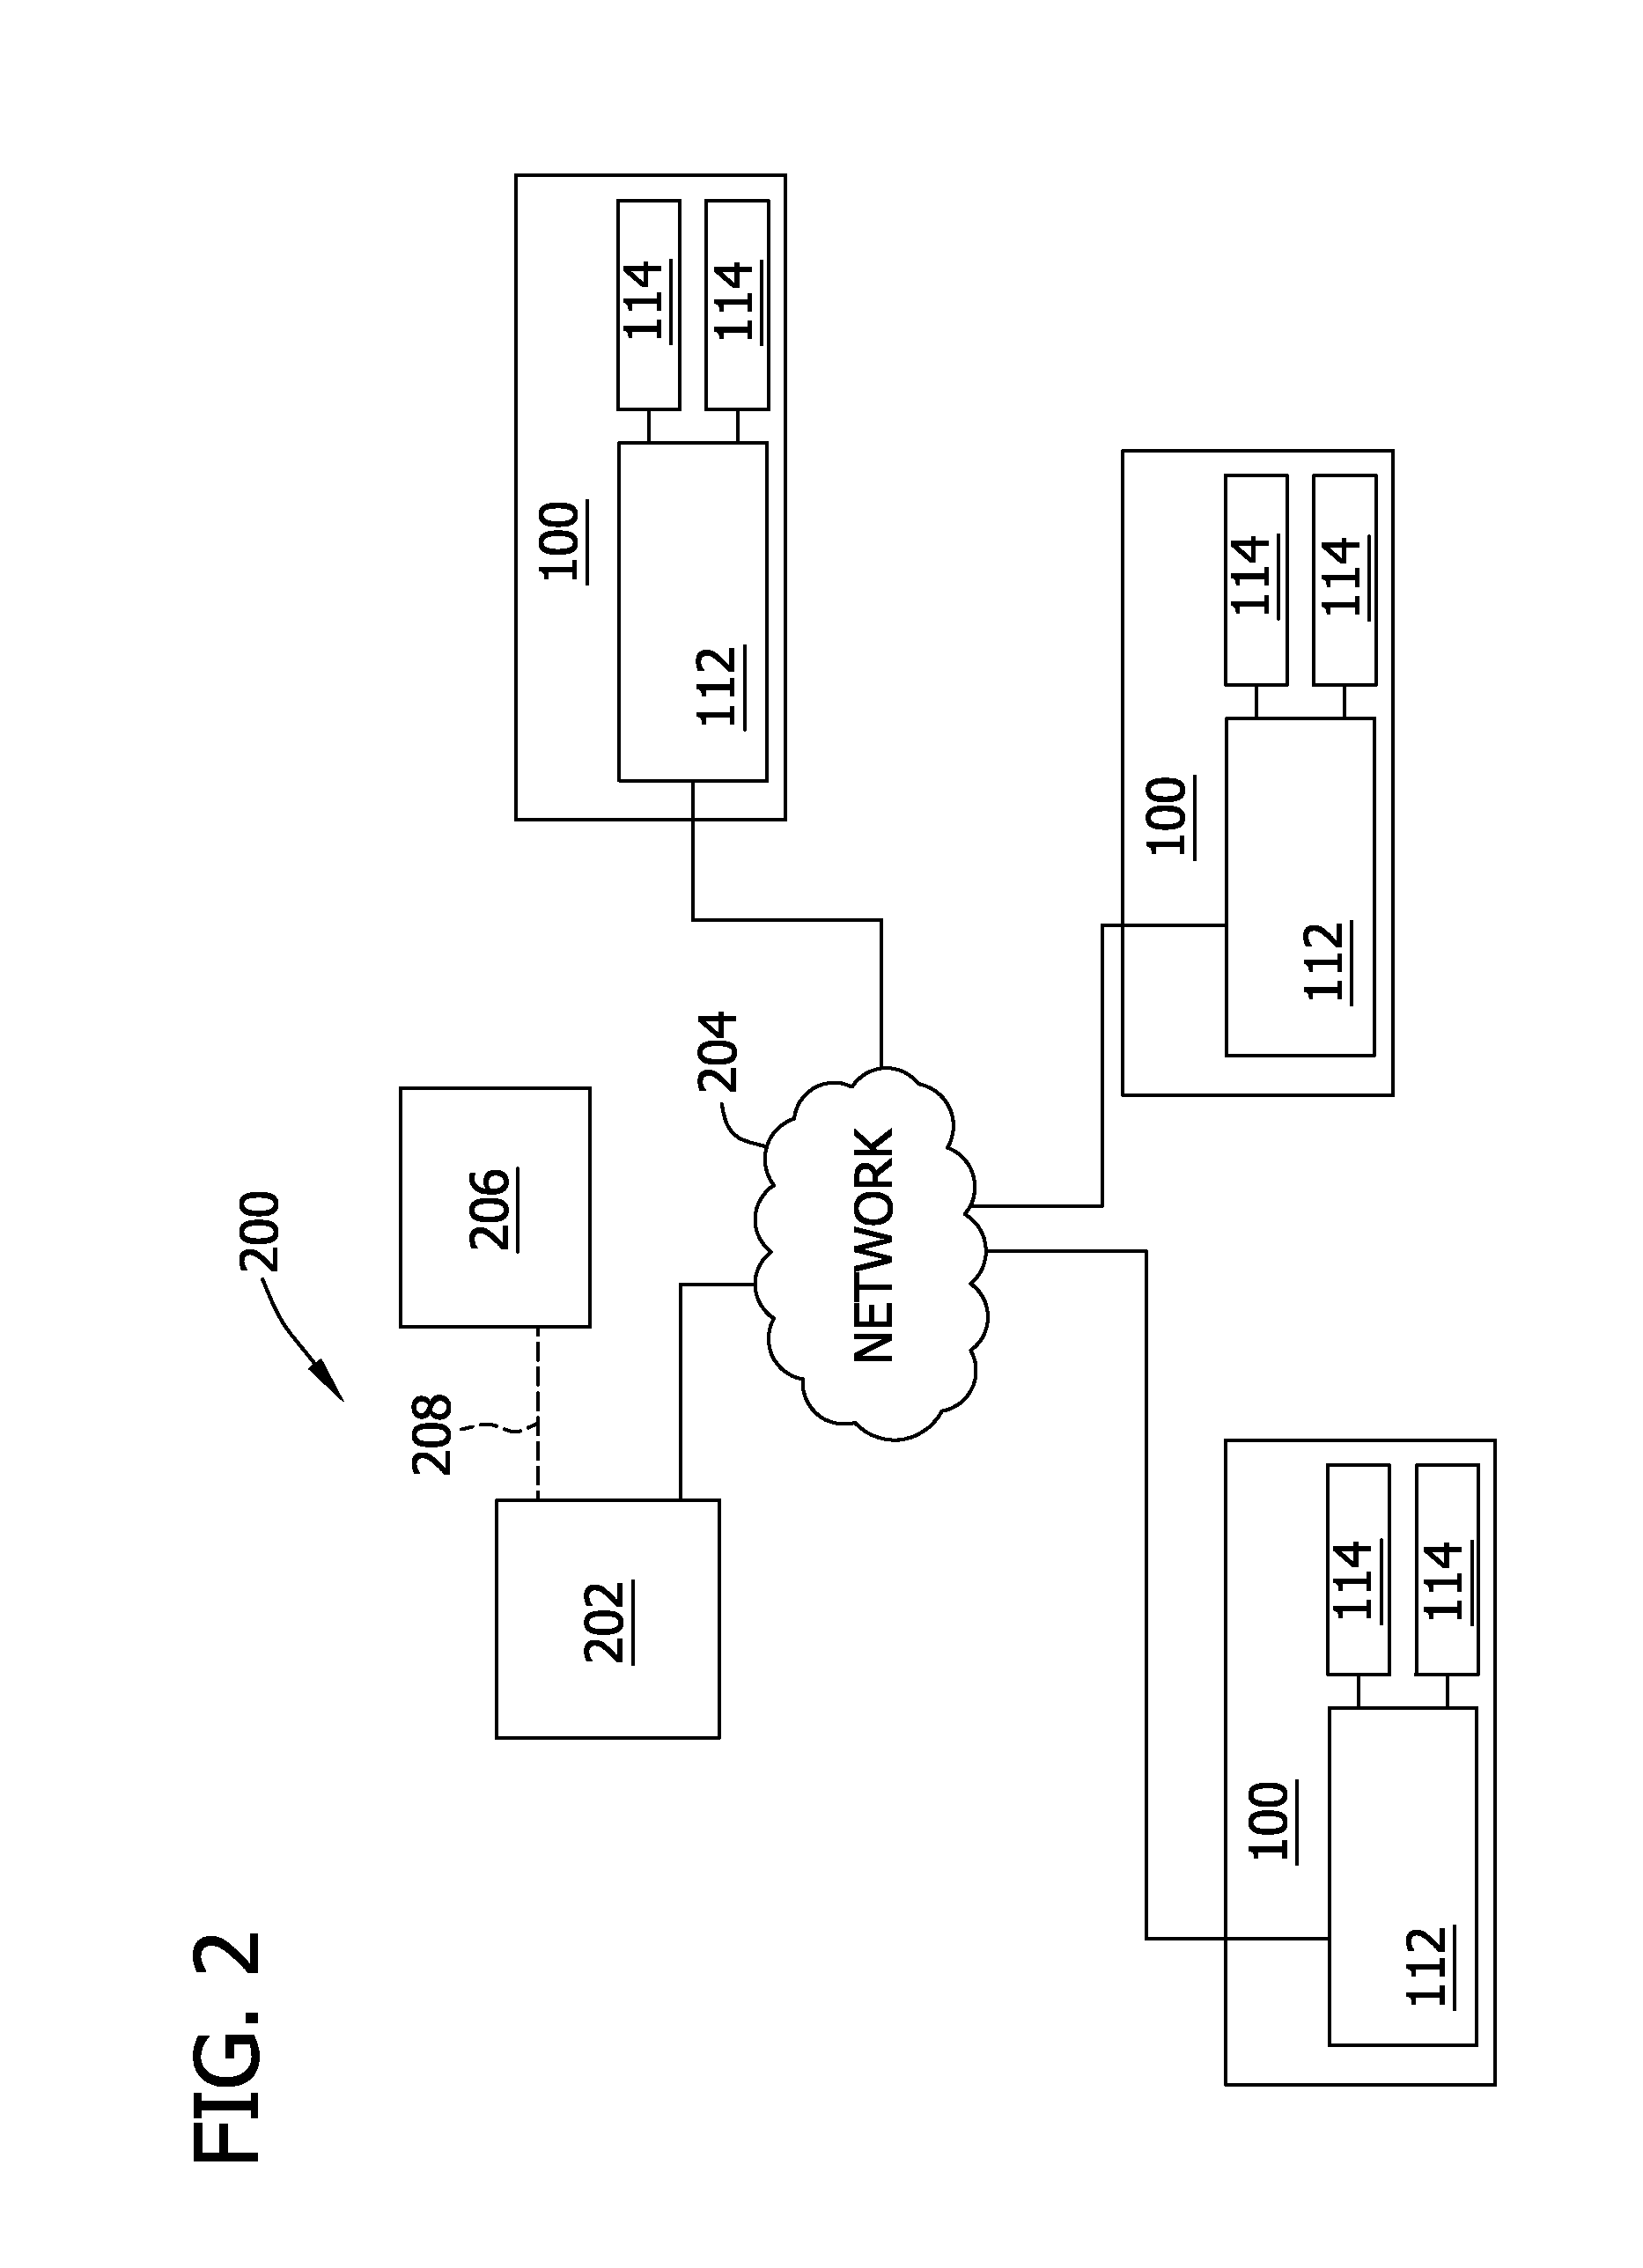 System and method for predicting wind turbine component failures